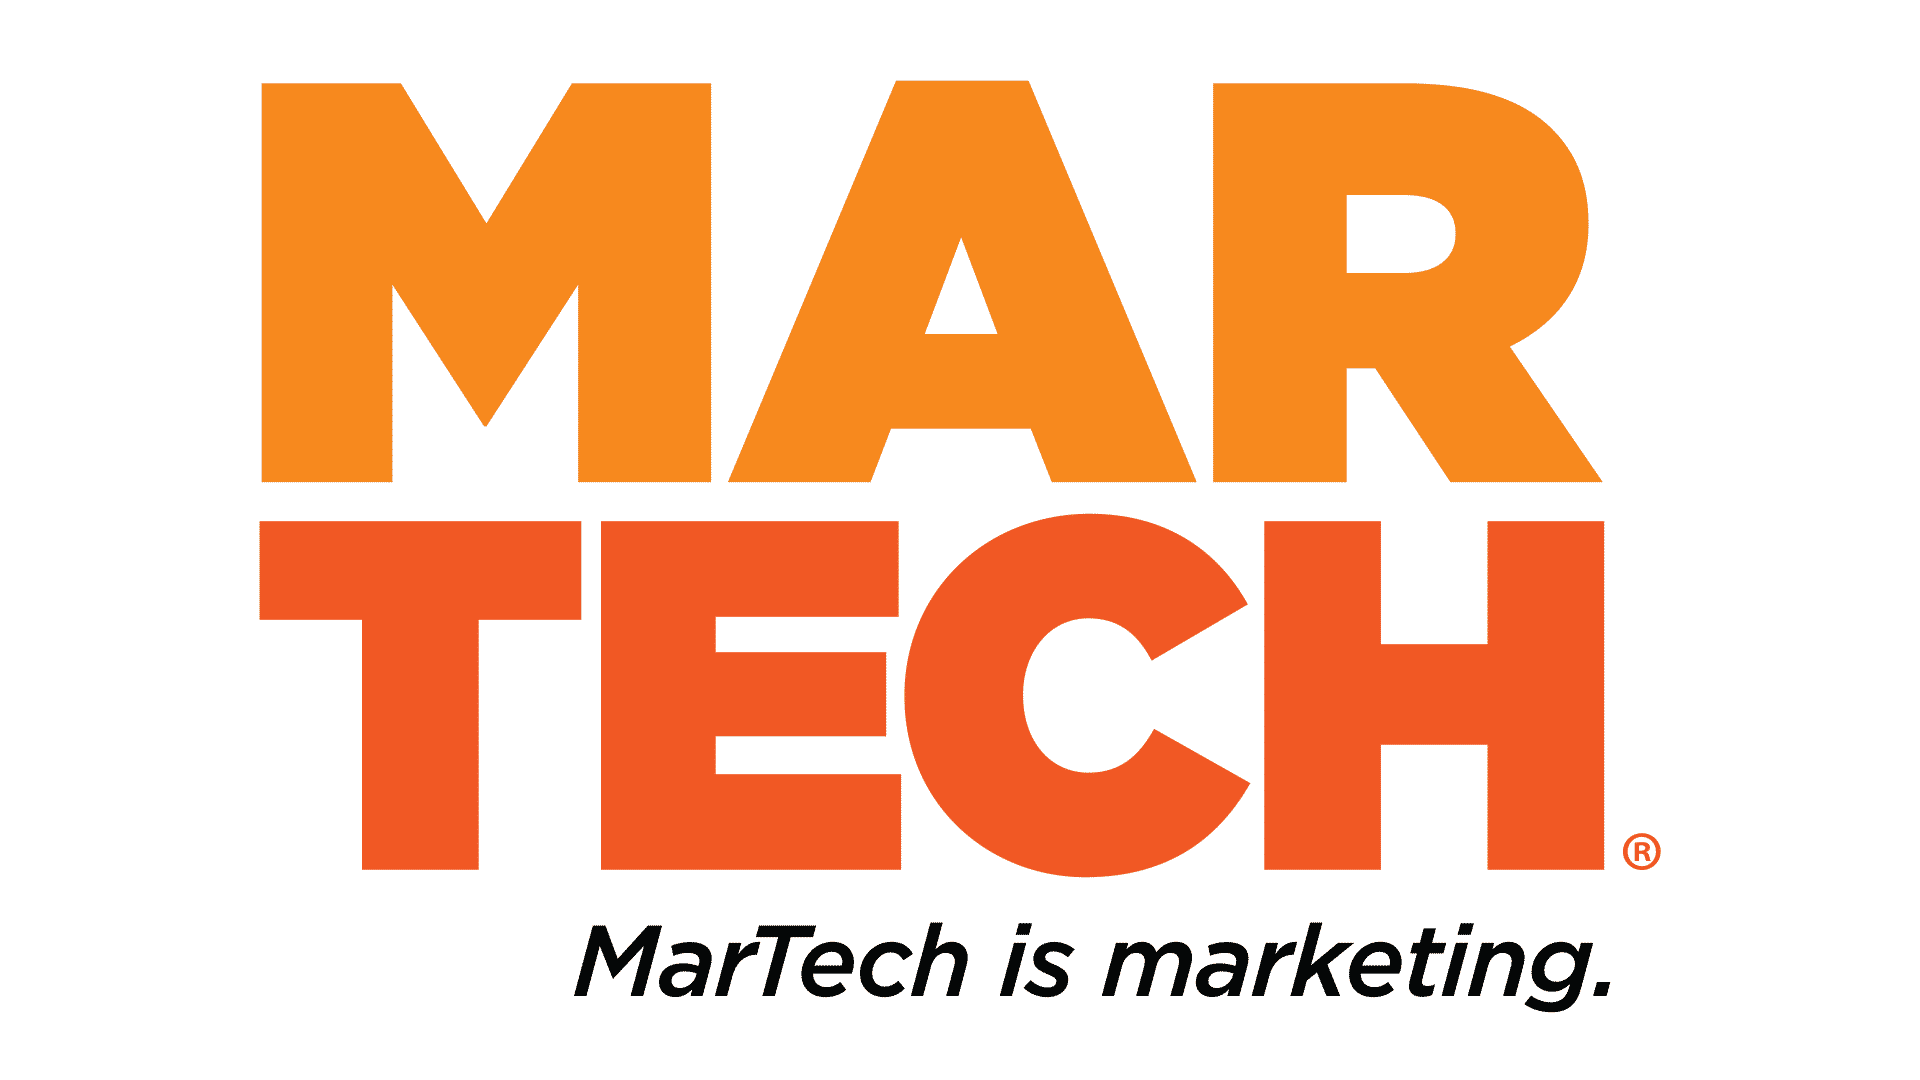 Interested in speaking at MarTech? Now’s the time to submit a session pitch for the September event